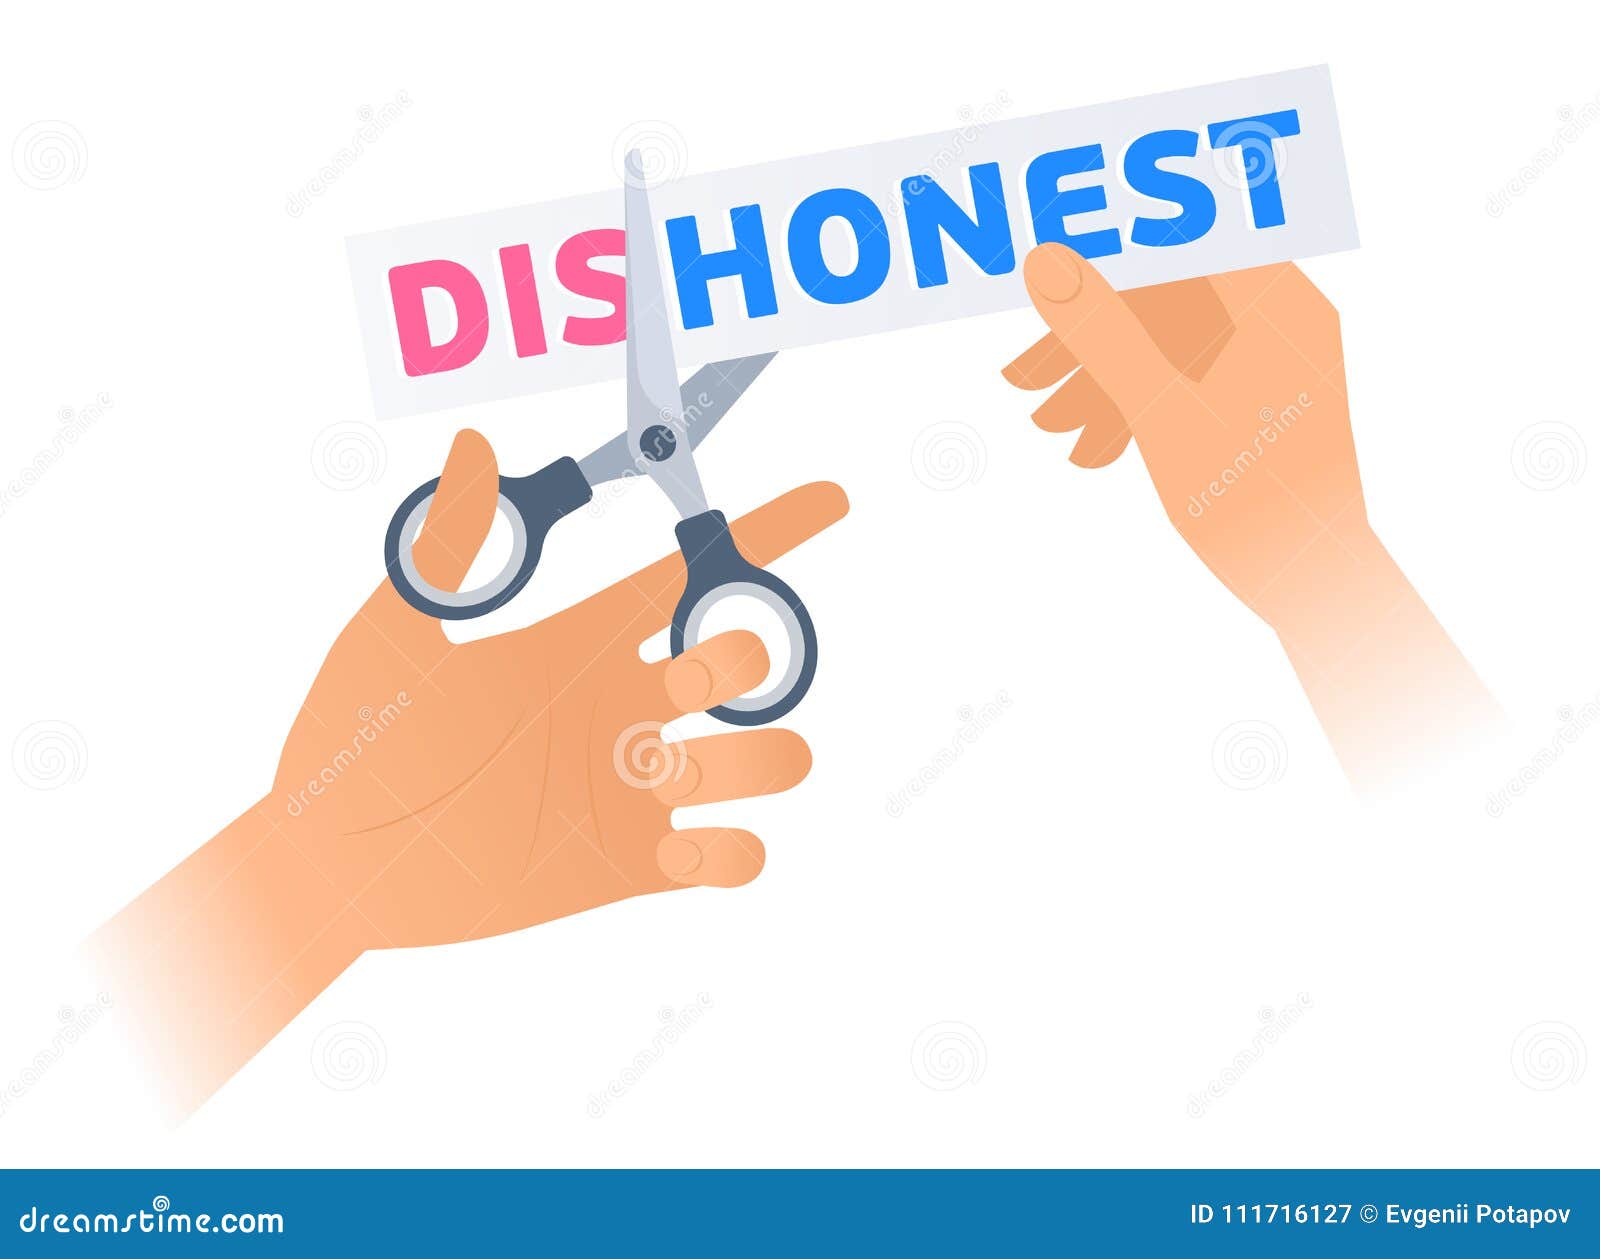 human hand with a scissors cuts a phrase dishonest